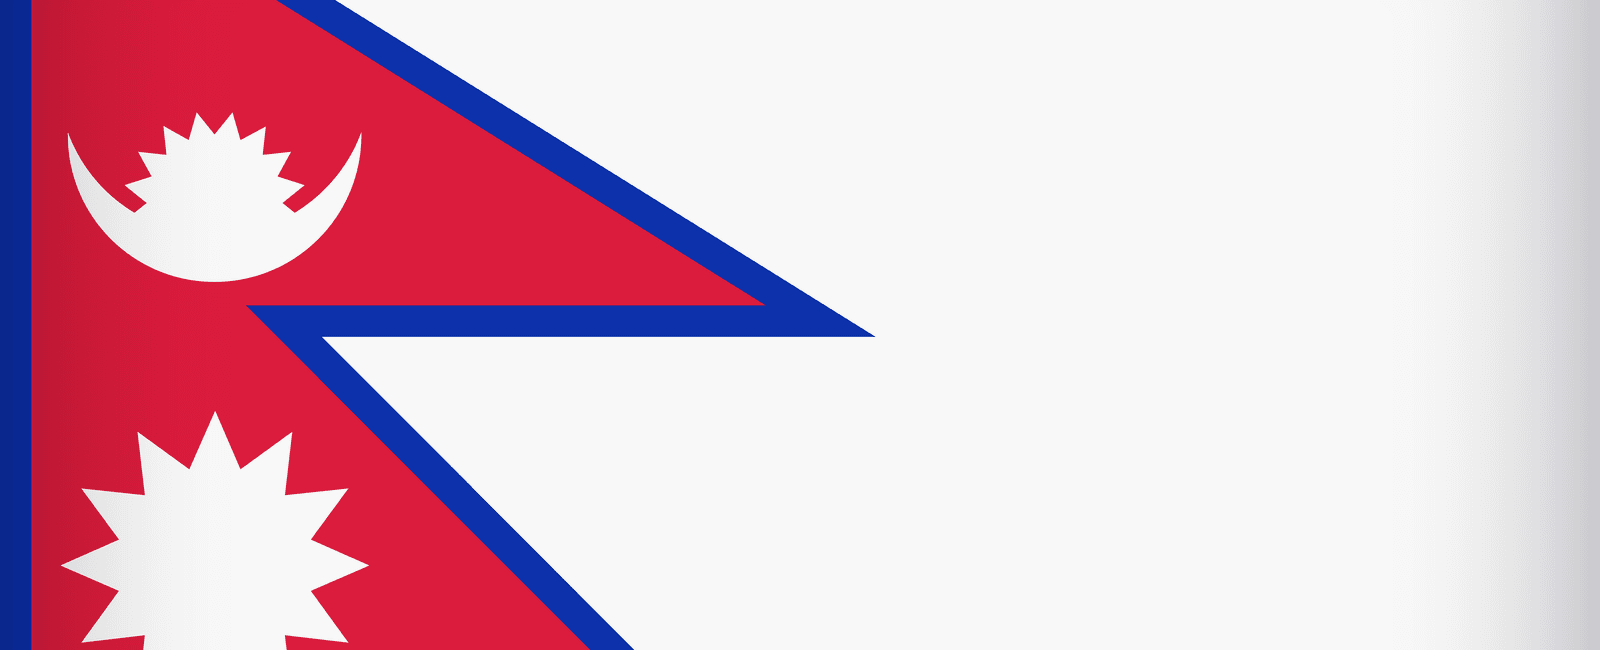 Nepal is the only country that has a non rectangular flag it is asymmetrical